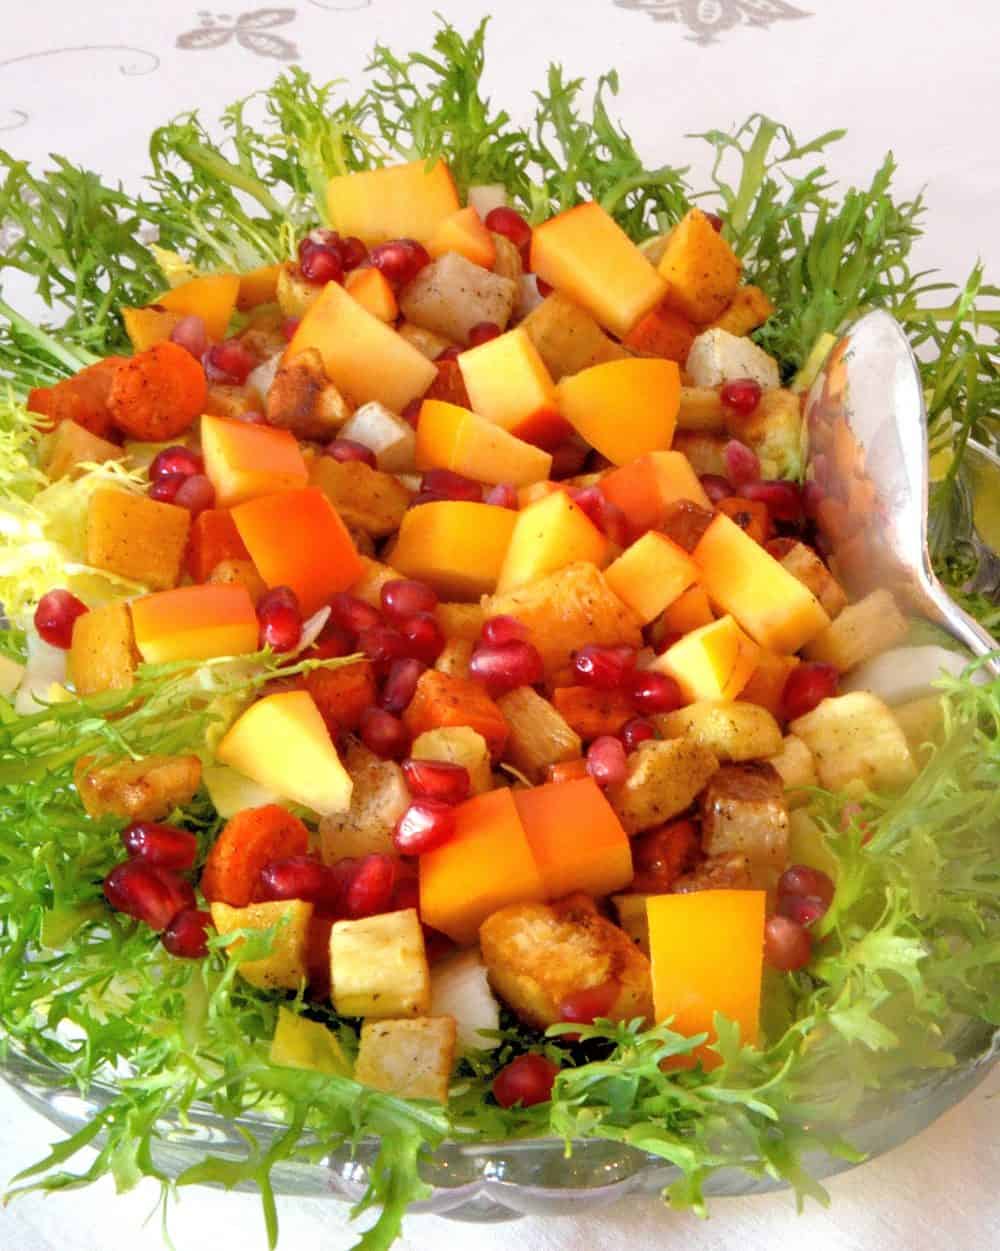 Roasted Root Vegetable Salad with Persimmons